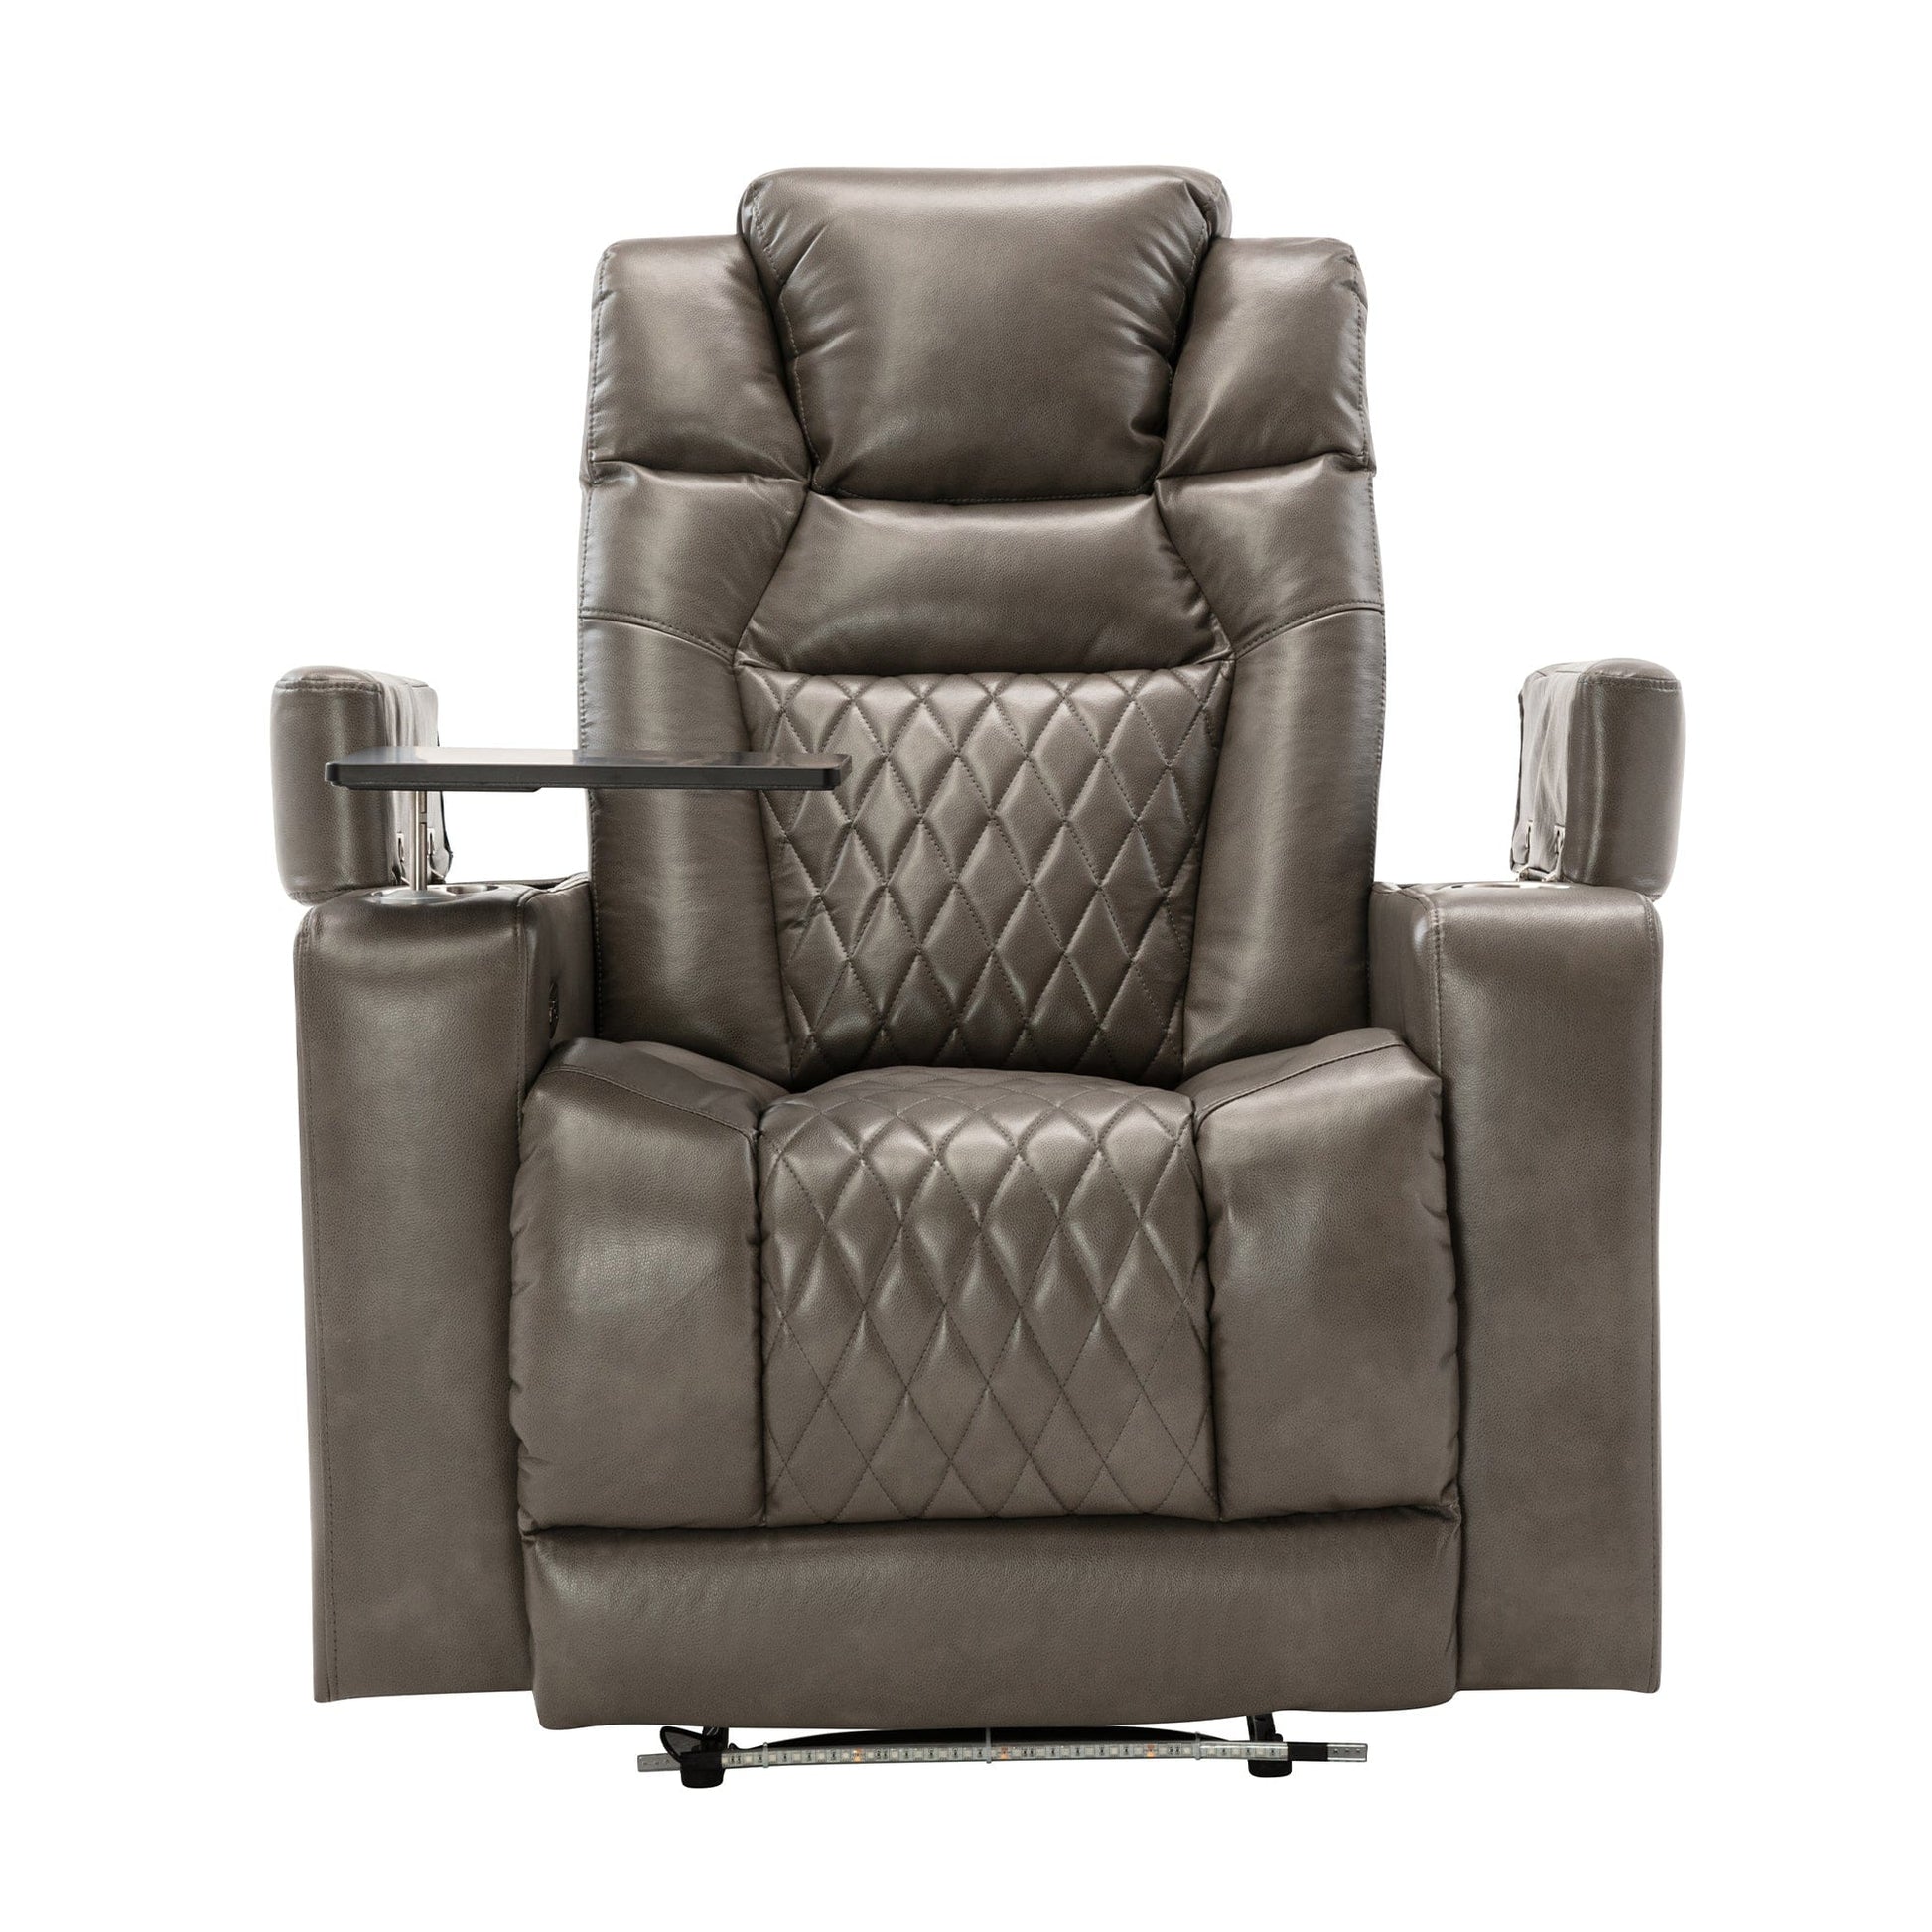 1st Choice Furniture Direct Recliner Chair 1st Choice Power Motion Recliner w/ Arm Storage, USB Port & Cup Holder